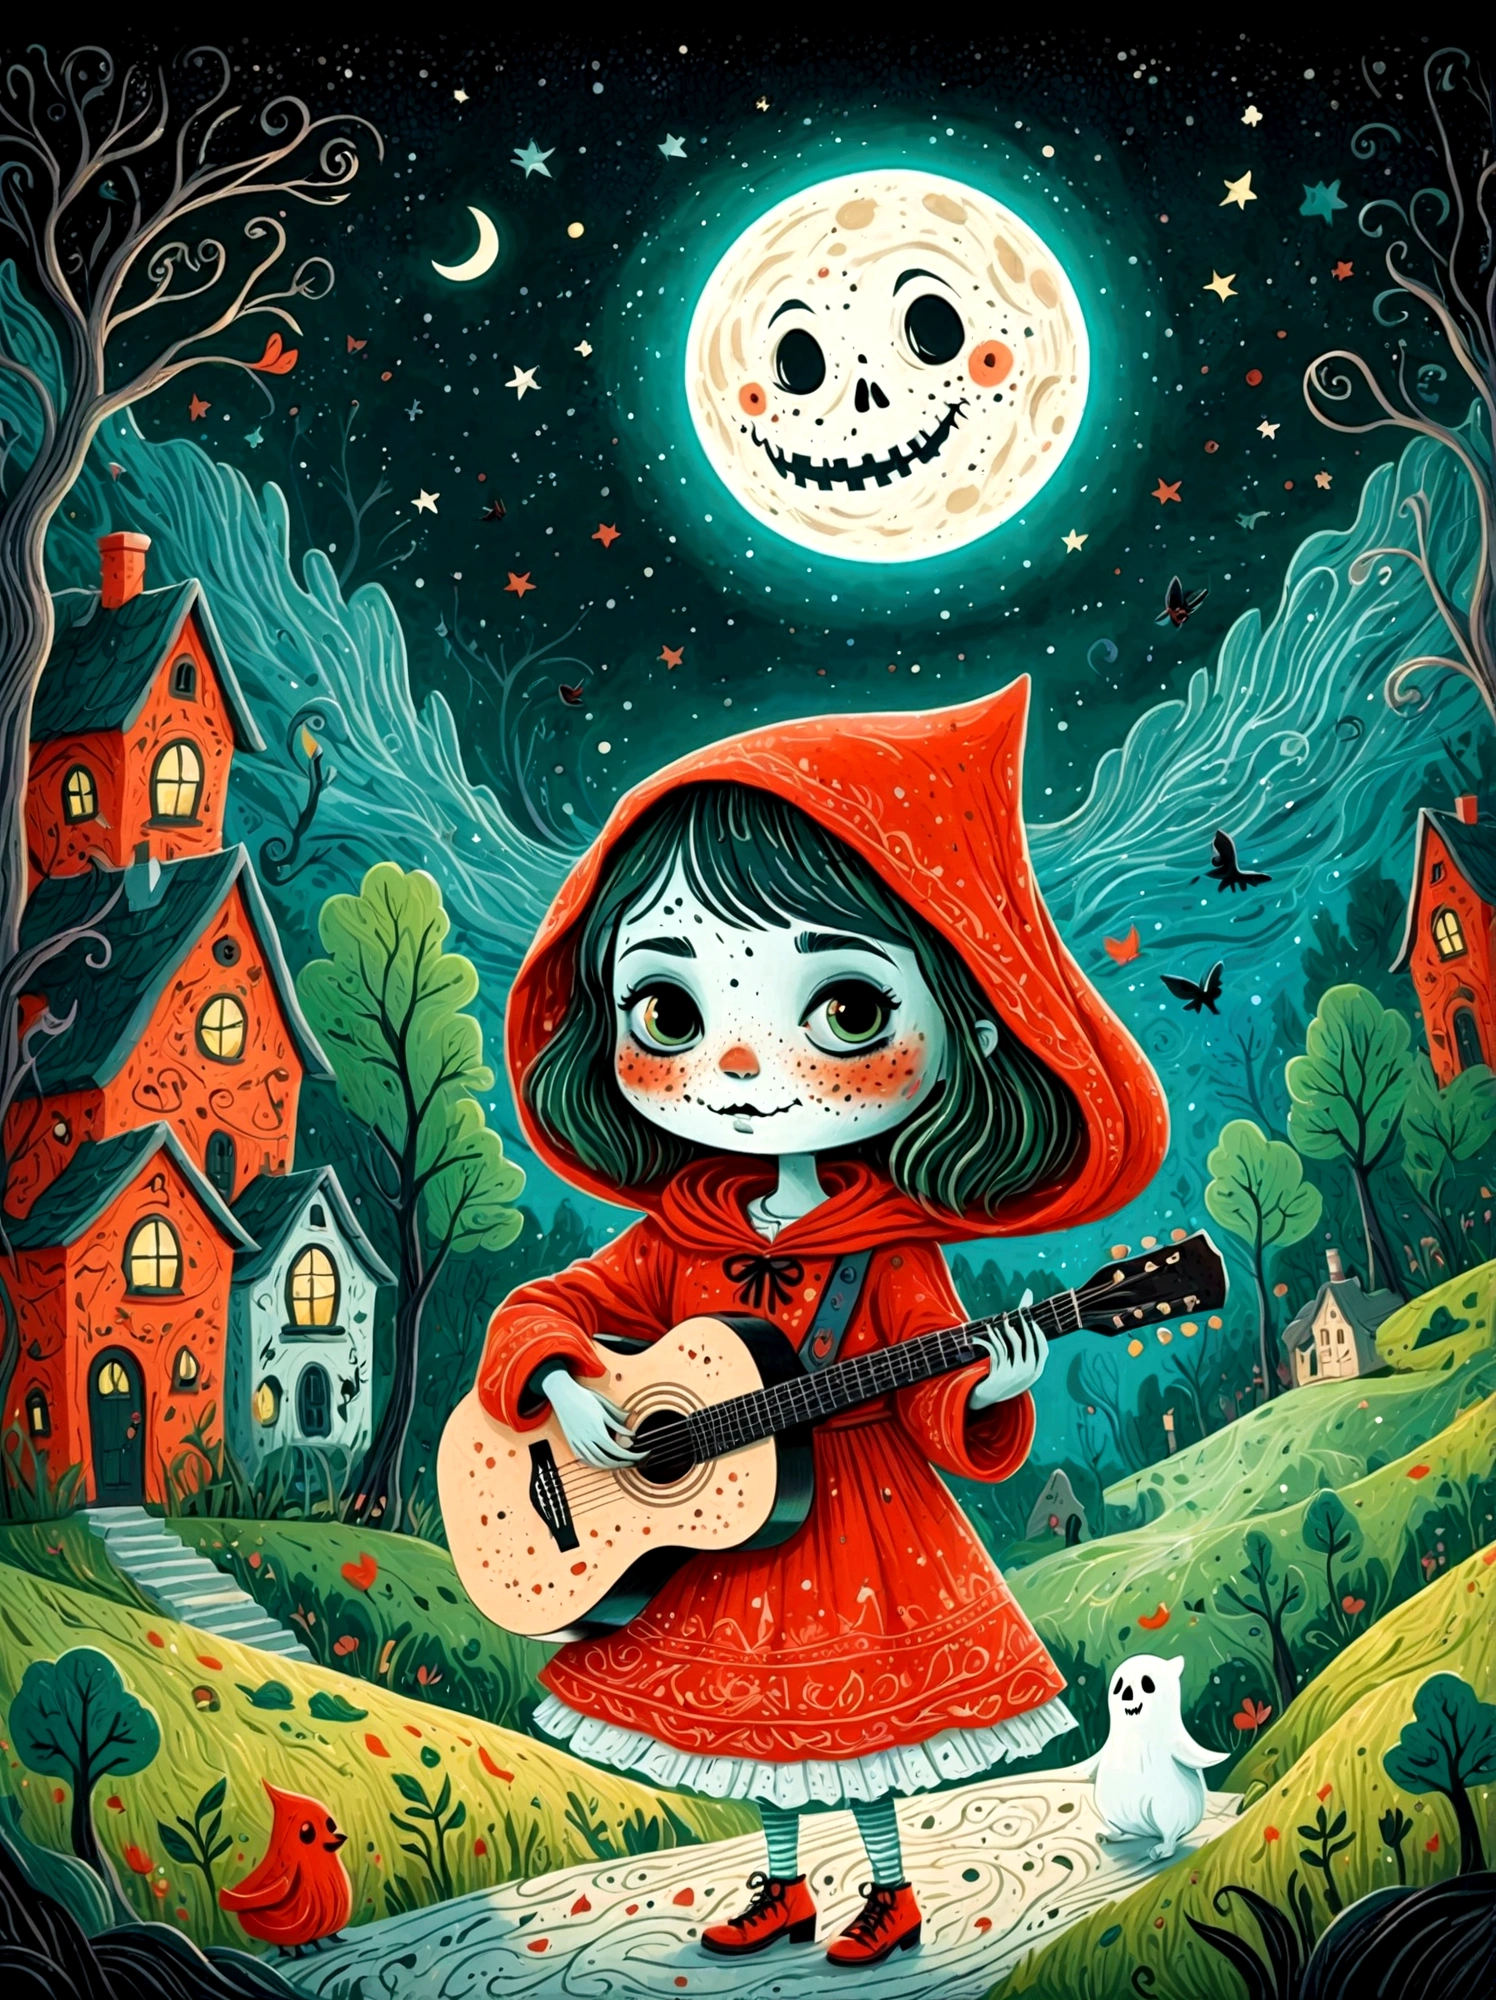 Cartoon hand drawn, 1girl, solo, Cute young charming little red riding hood girl，Strong zombie makeup, Playing an old guitar，the guitar player，(Ghost Crowd)，Ghost Viewer，(Concert scene:1.5)，Starry nights，Gloomy and foggy atmosphere，The cute absurdity，The attraction and rejection of extraordinary appearance，Magical naive art，Bright blue and green，The color palette is in red, orange and black tones and has a sketchy style, The background should have a simple hand-drawn doodle pattern, 1shxx1